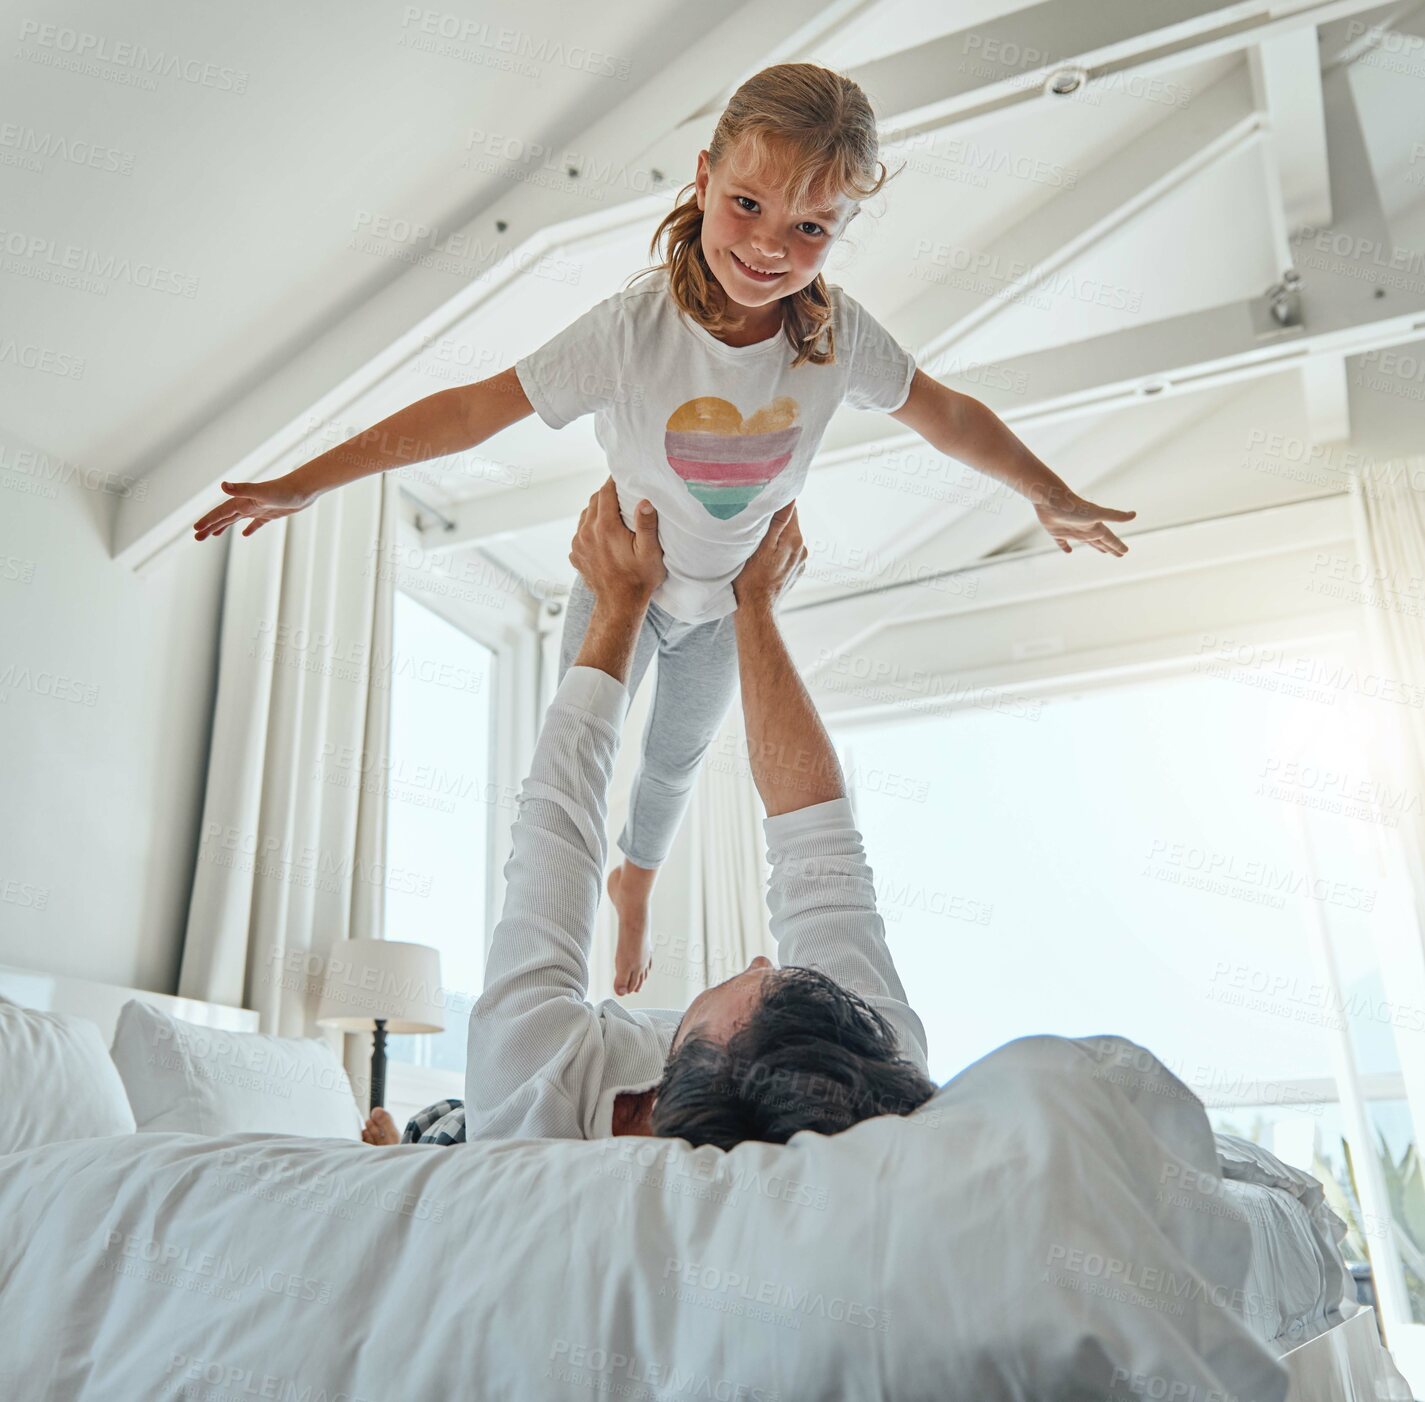 Buy stock photo Playful, bedroom and father holding his child while relaxing on the bed together in their home. Happy, smile and portrait of girl kid playing, resting and bonding with her dad in the room of a house.